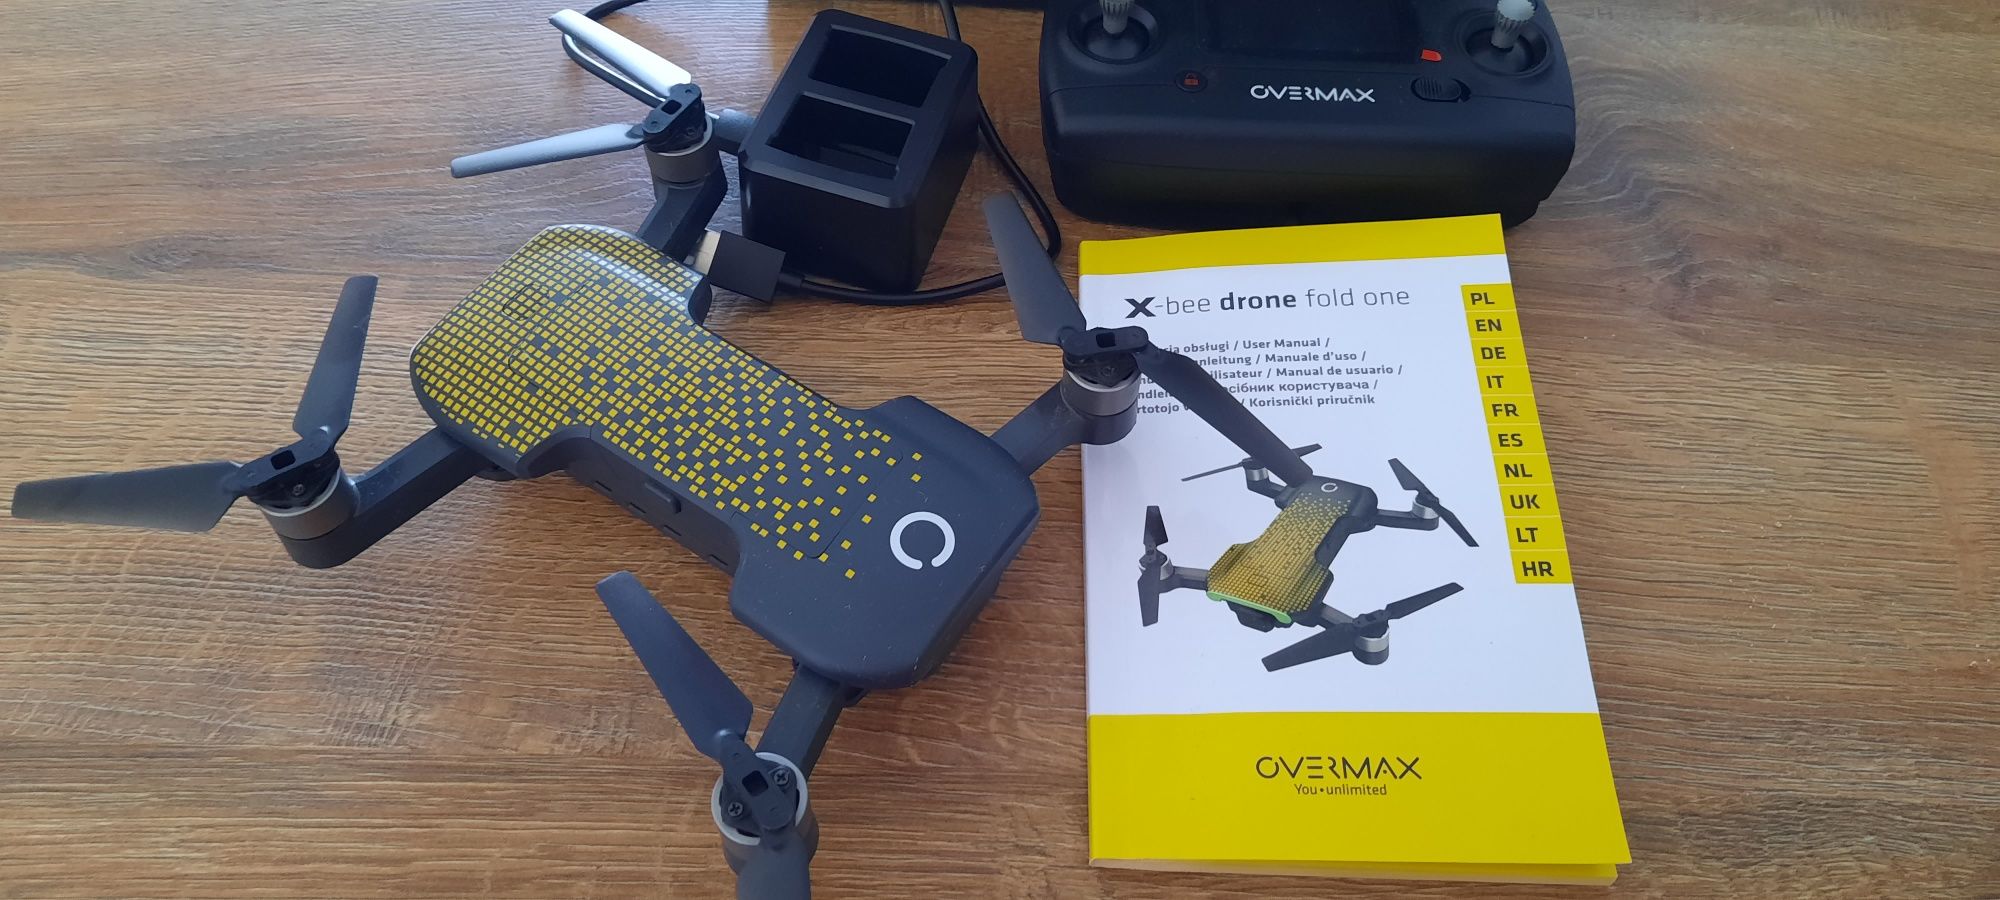 Dron Overmax X-bee fold one